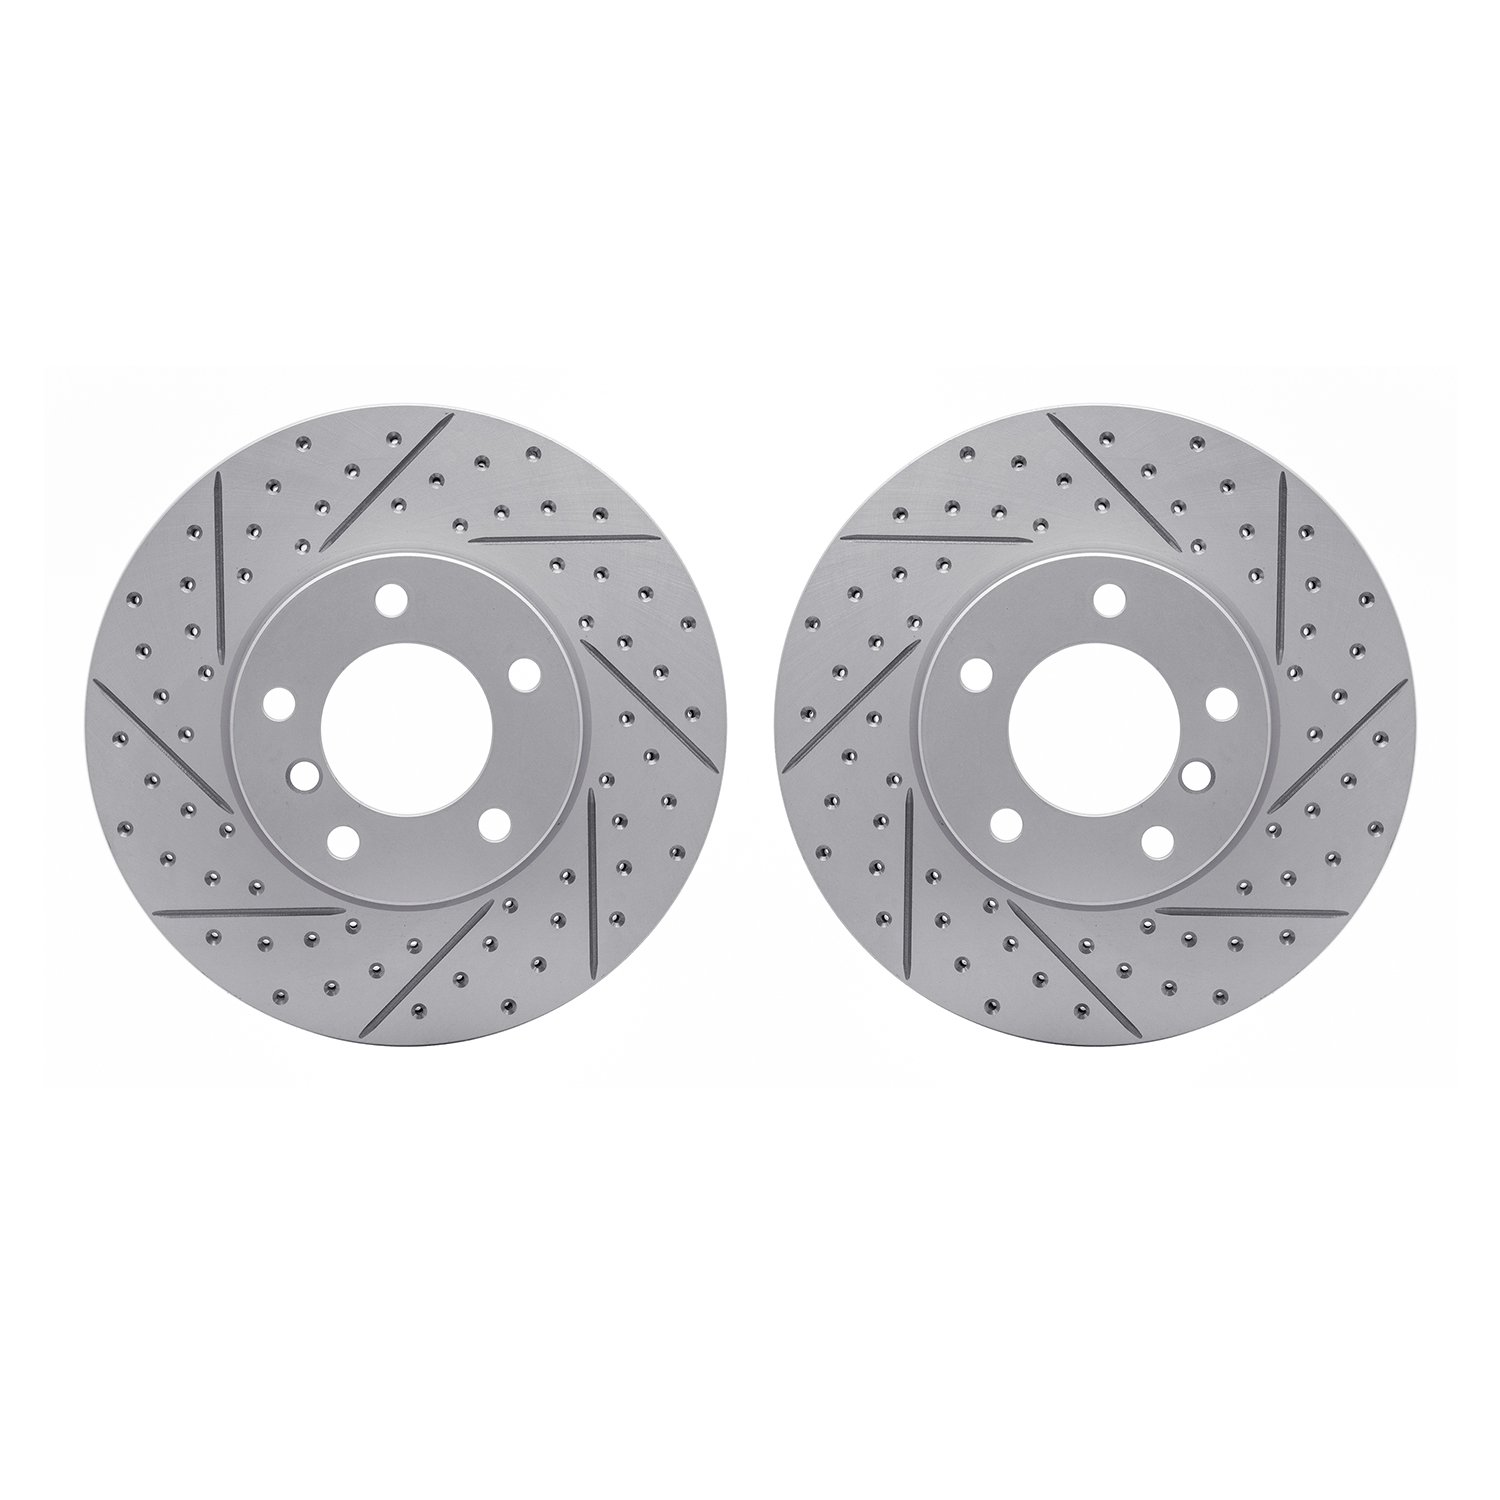 2002-31004 Geoperformance Drilled/Slotted Brake Rotors, 2007-2021 BMW, Position: Front